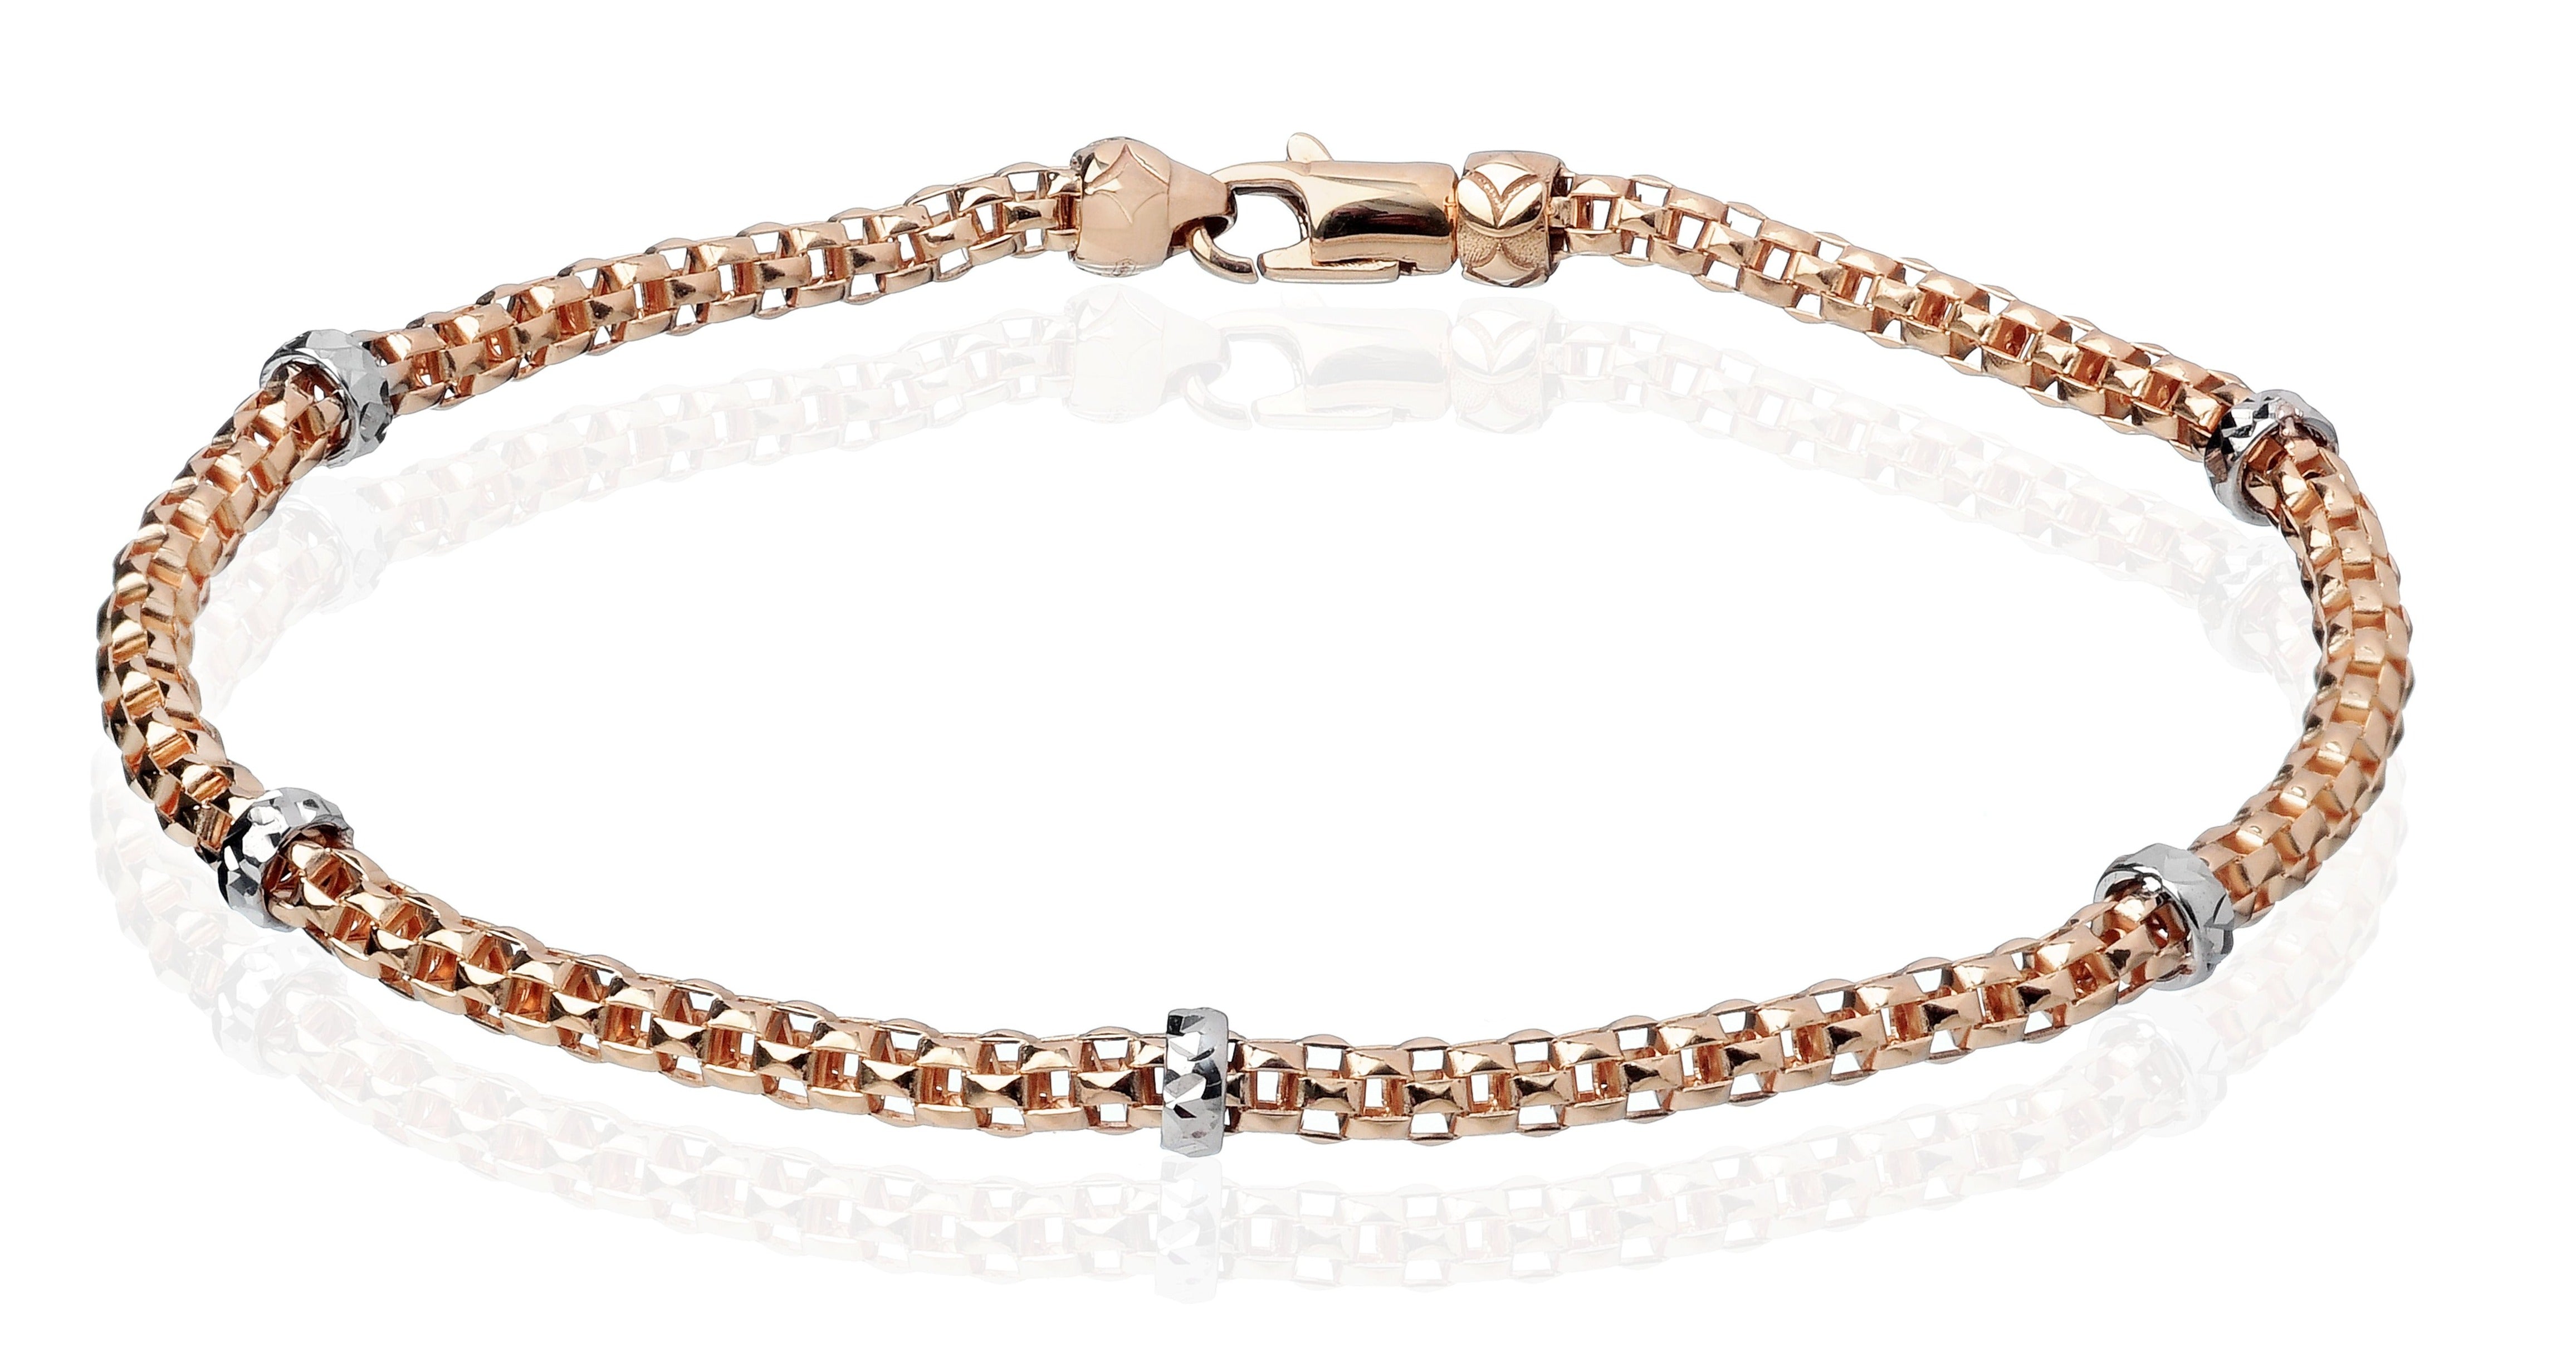 From our Stella Millano Italian Jewelry  18k Italian white & rose gold  One Size Fits All  Rockstar collection  5 solid rondel    Mesh style  Secure lobster clasp.